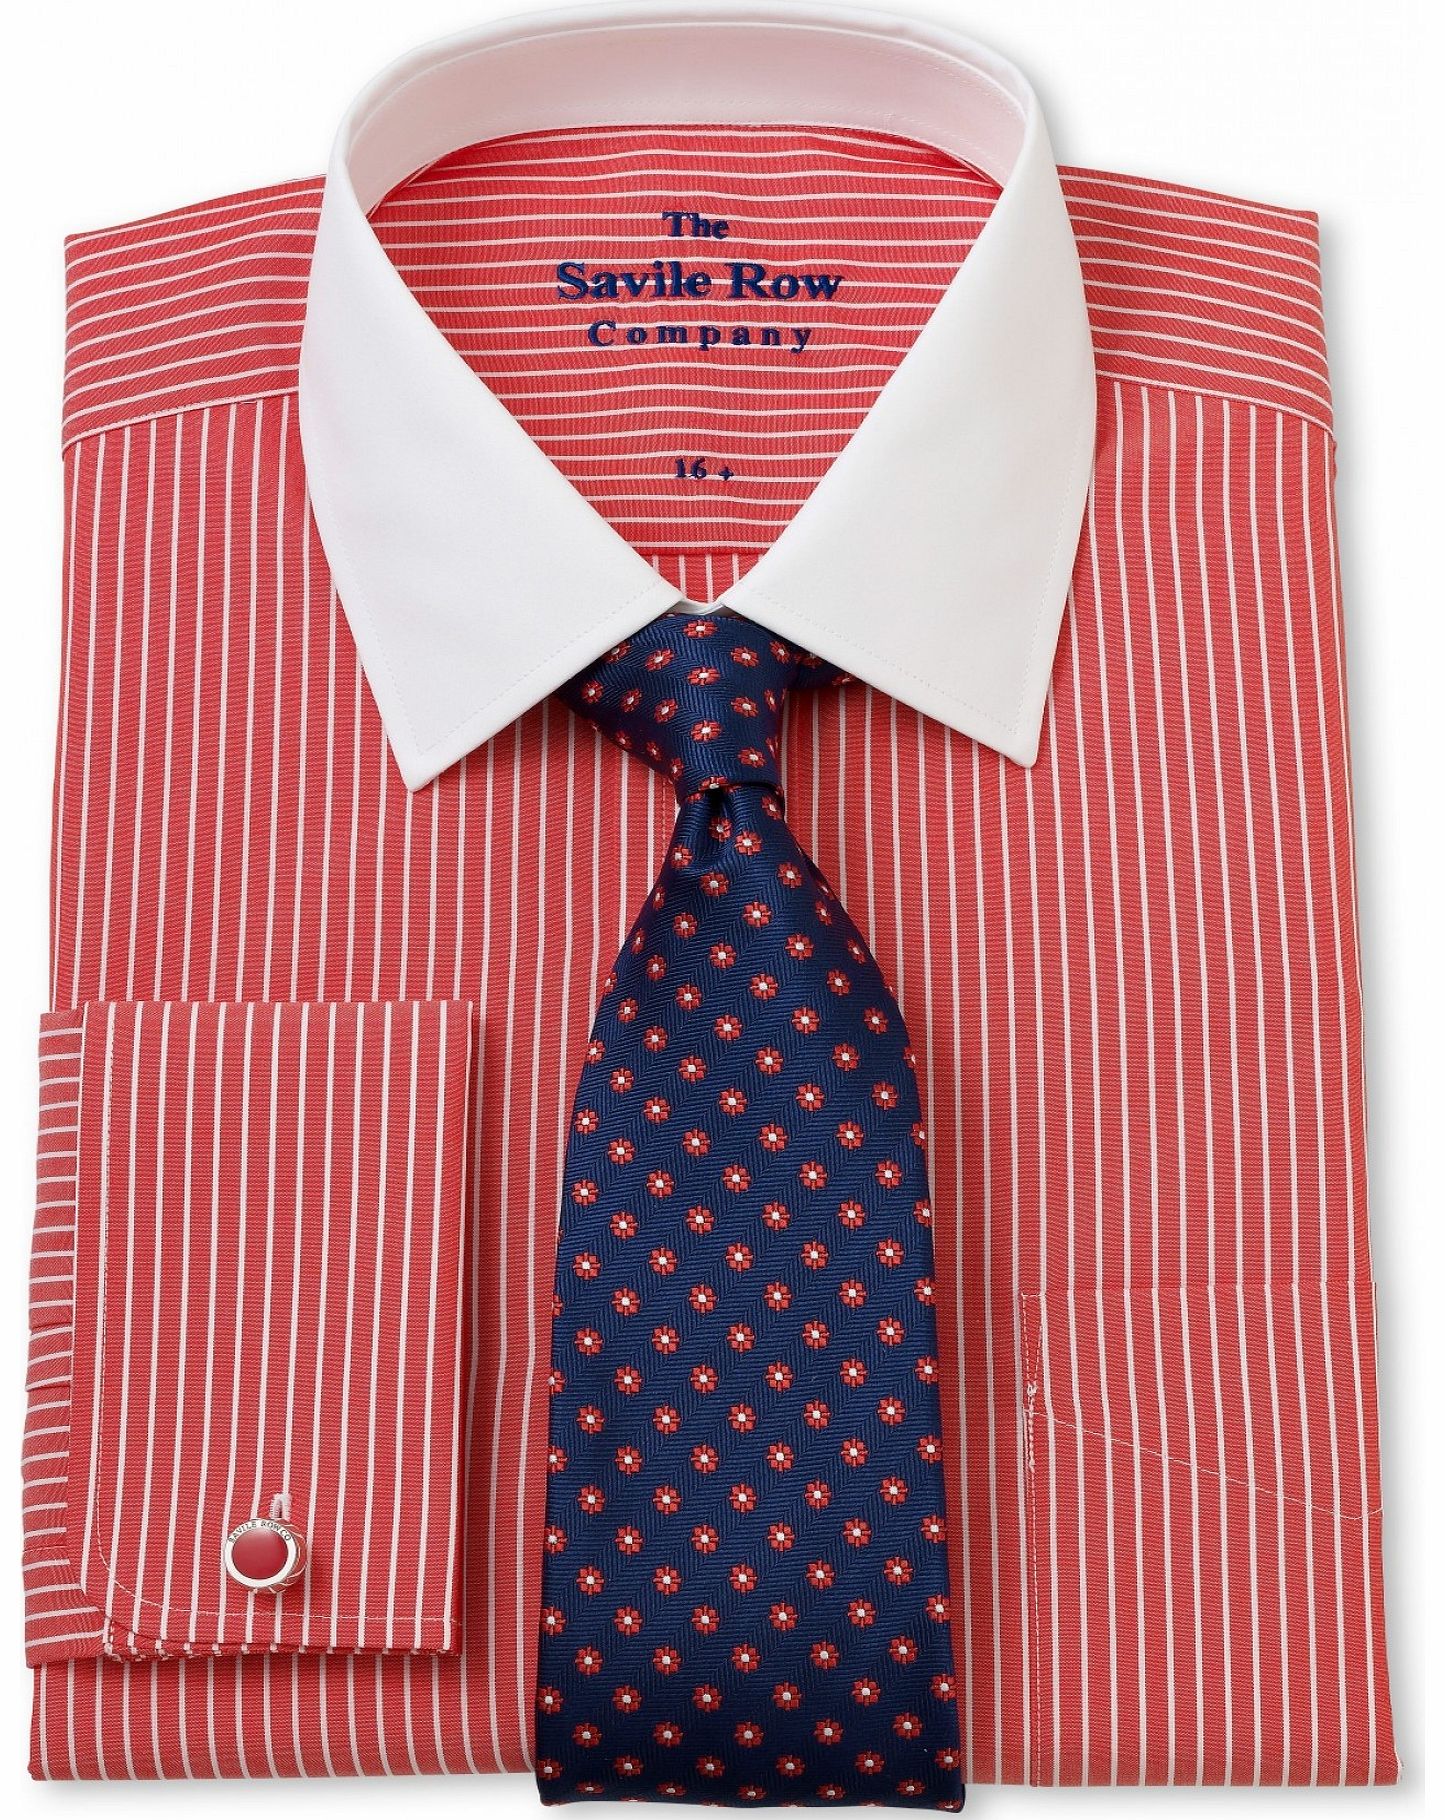 Savile Row Company Red White Bengal Classic Fit Shirt 18``